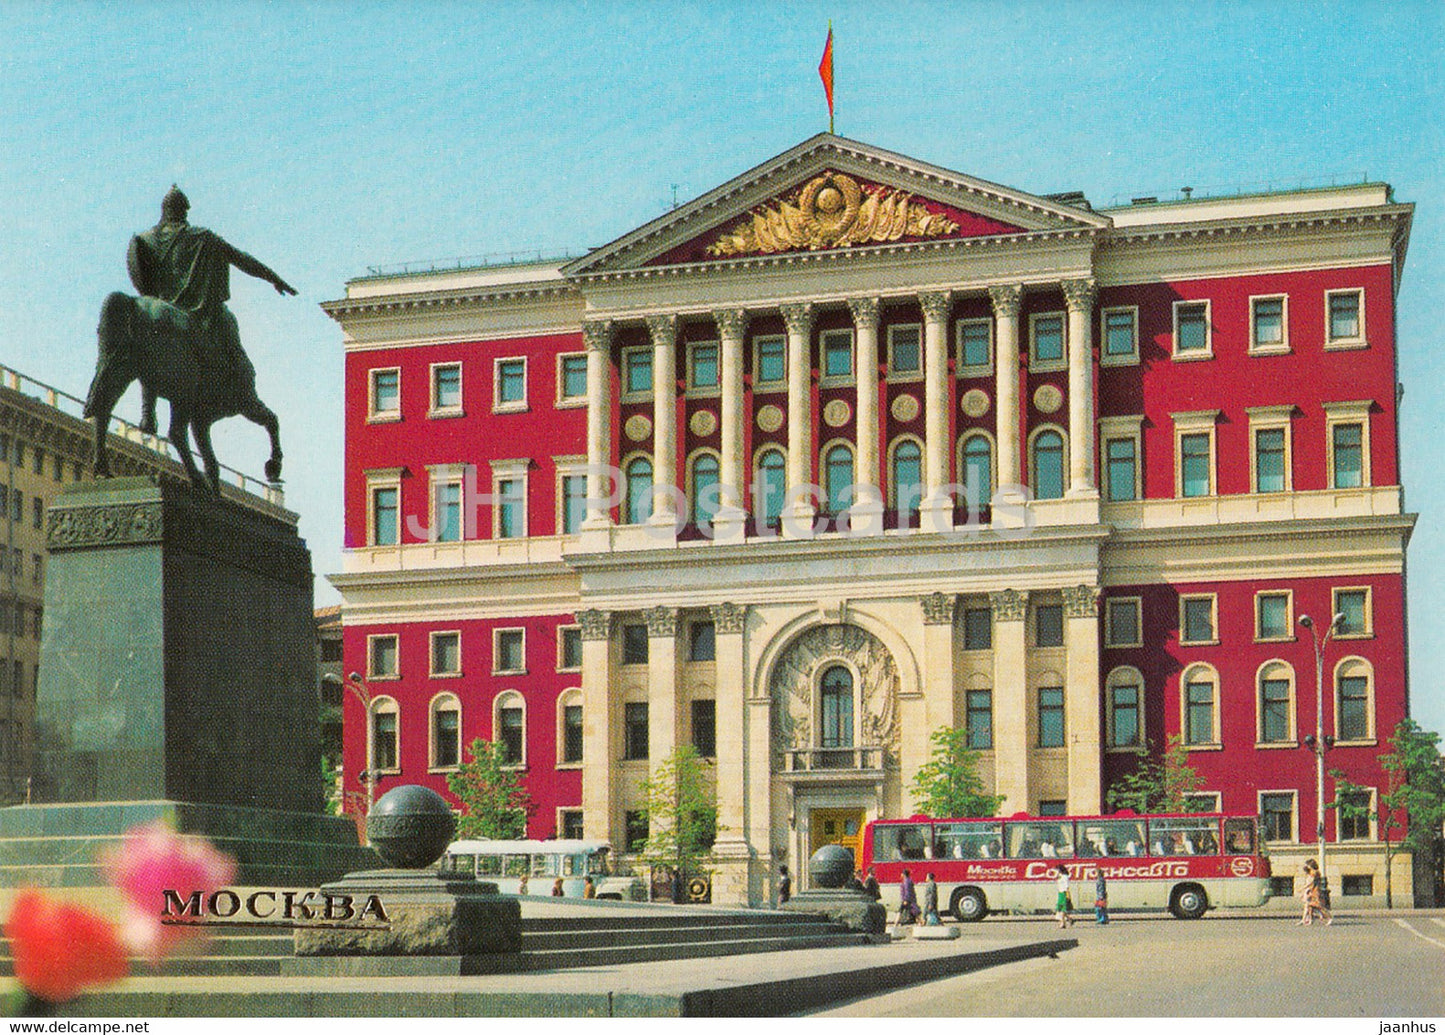 Moscow - Soviet Square - Moscow City Council - bus Ikarus - 1983 - Russia USSR - unused - JH Postcards